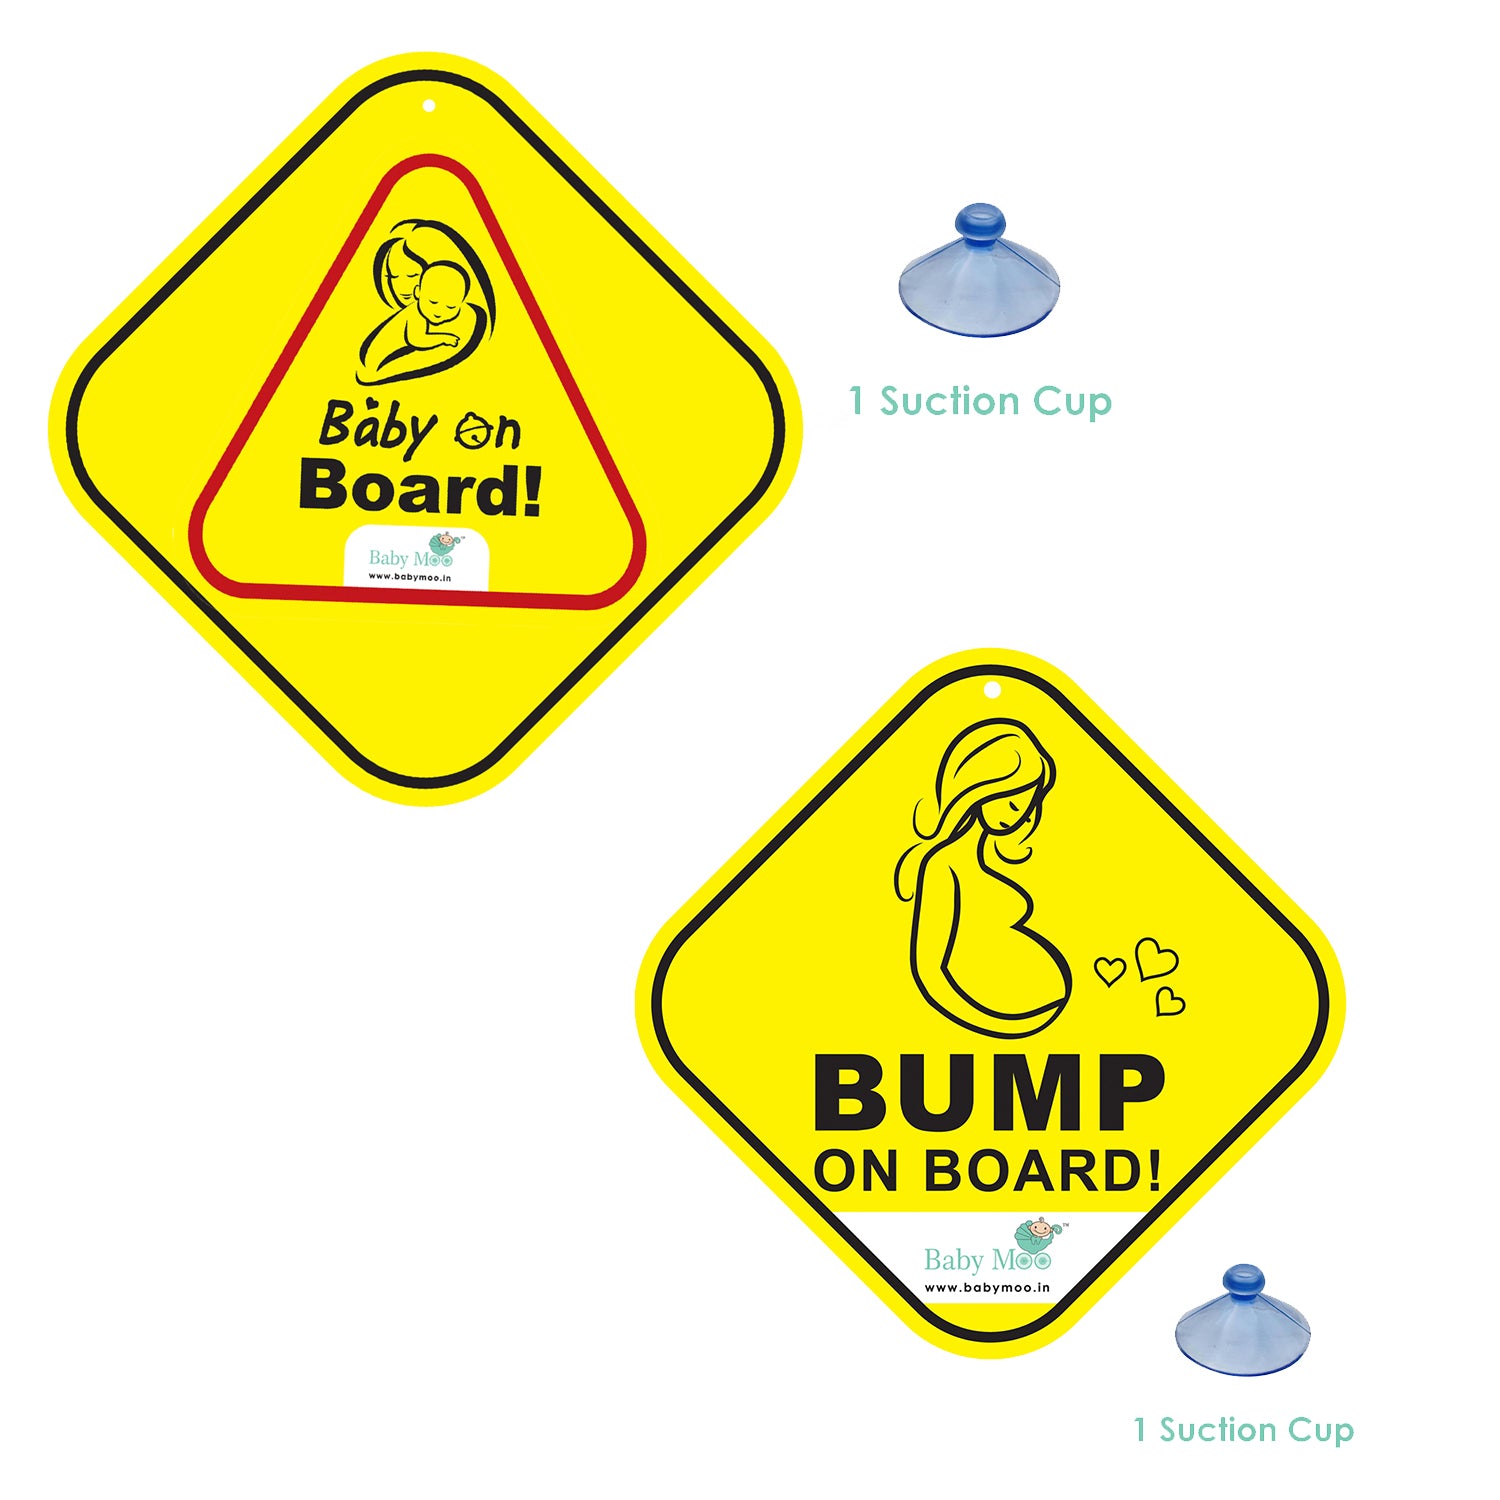 Baby Moo Bump And Baby On Board Car Safety Sign With Suction Cup Clip 2 Pack - Yellow - Baby Moo